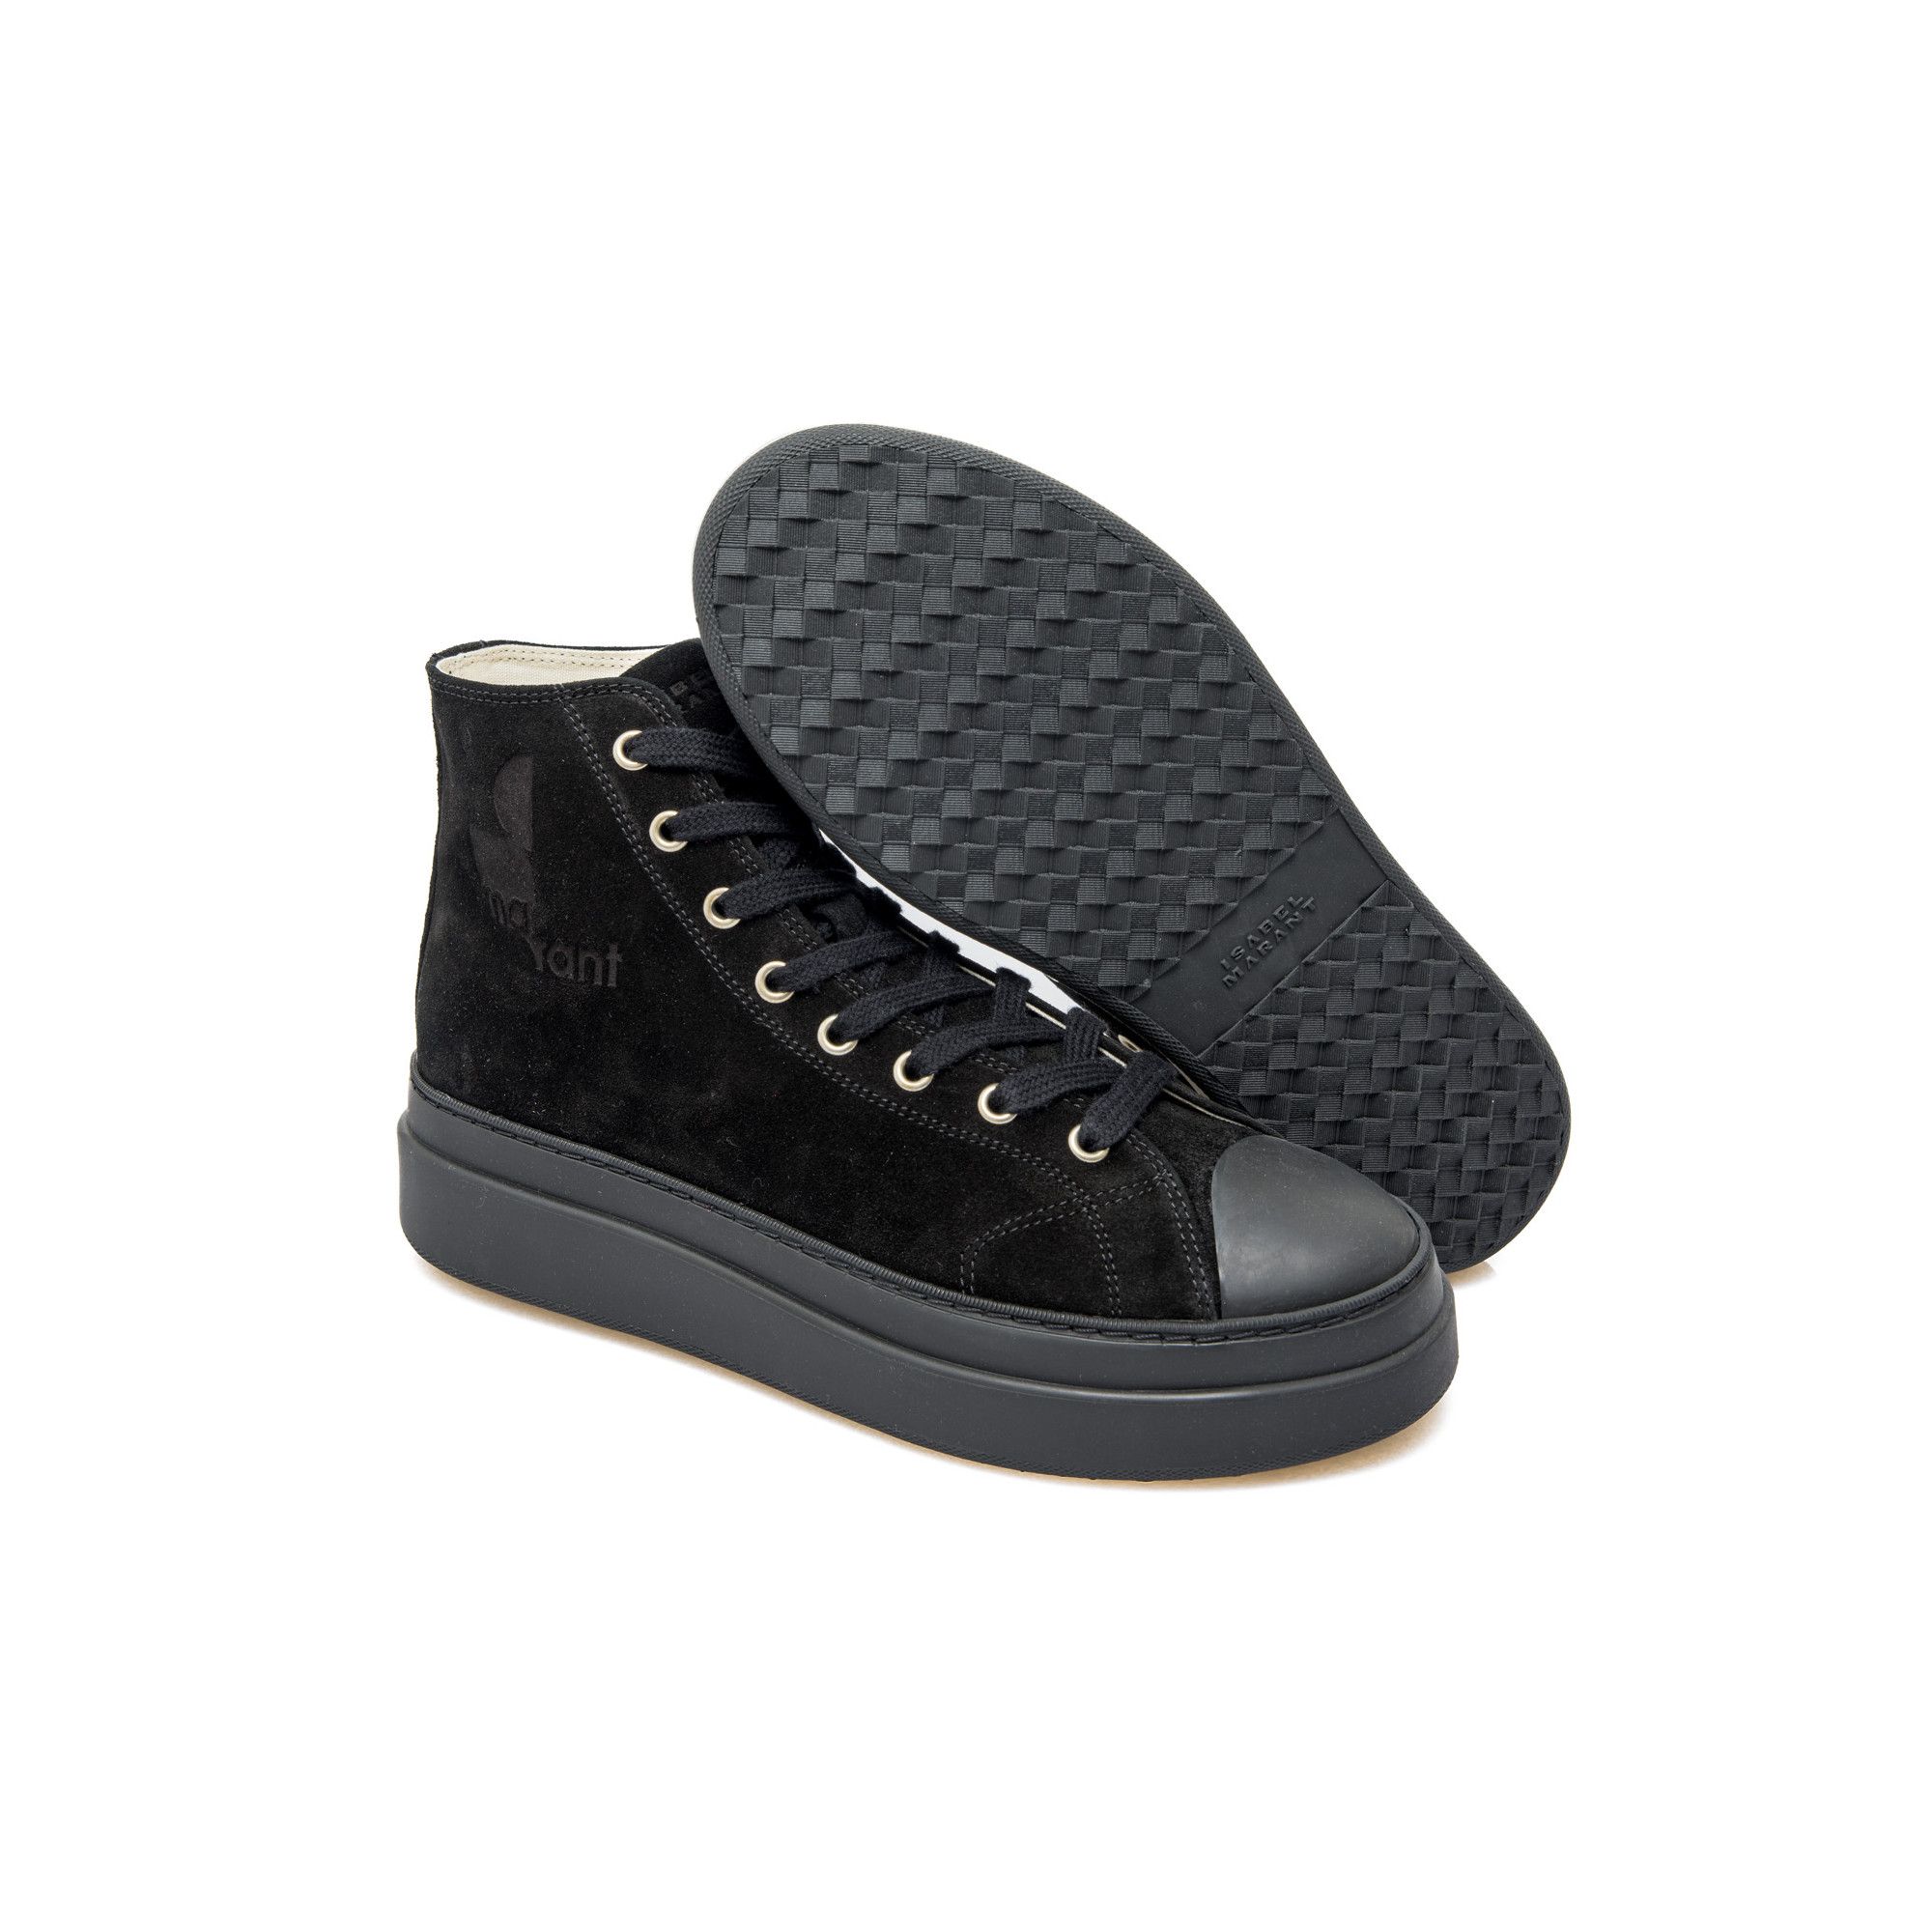 IetpShops Canada - 'Donatee' leather ankle boots Isabel Marant - Alexander  McQueen low-top sneakers